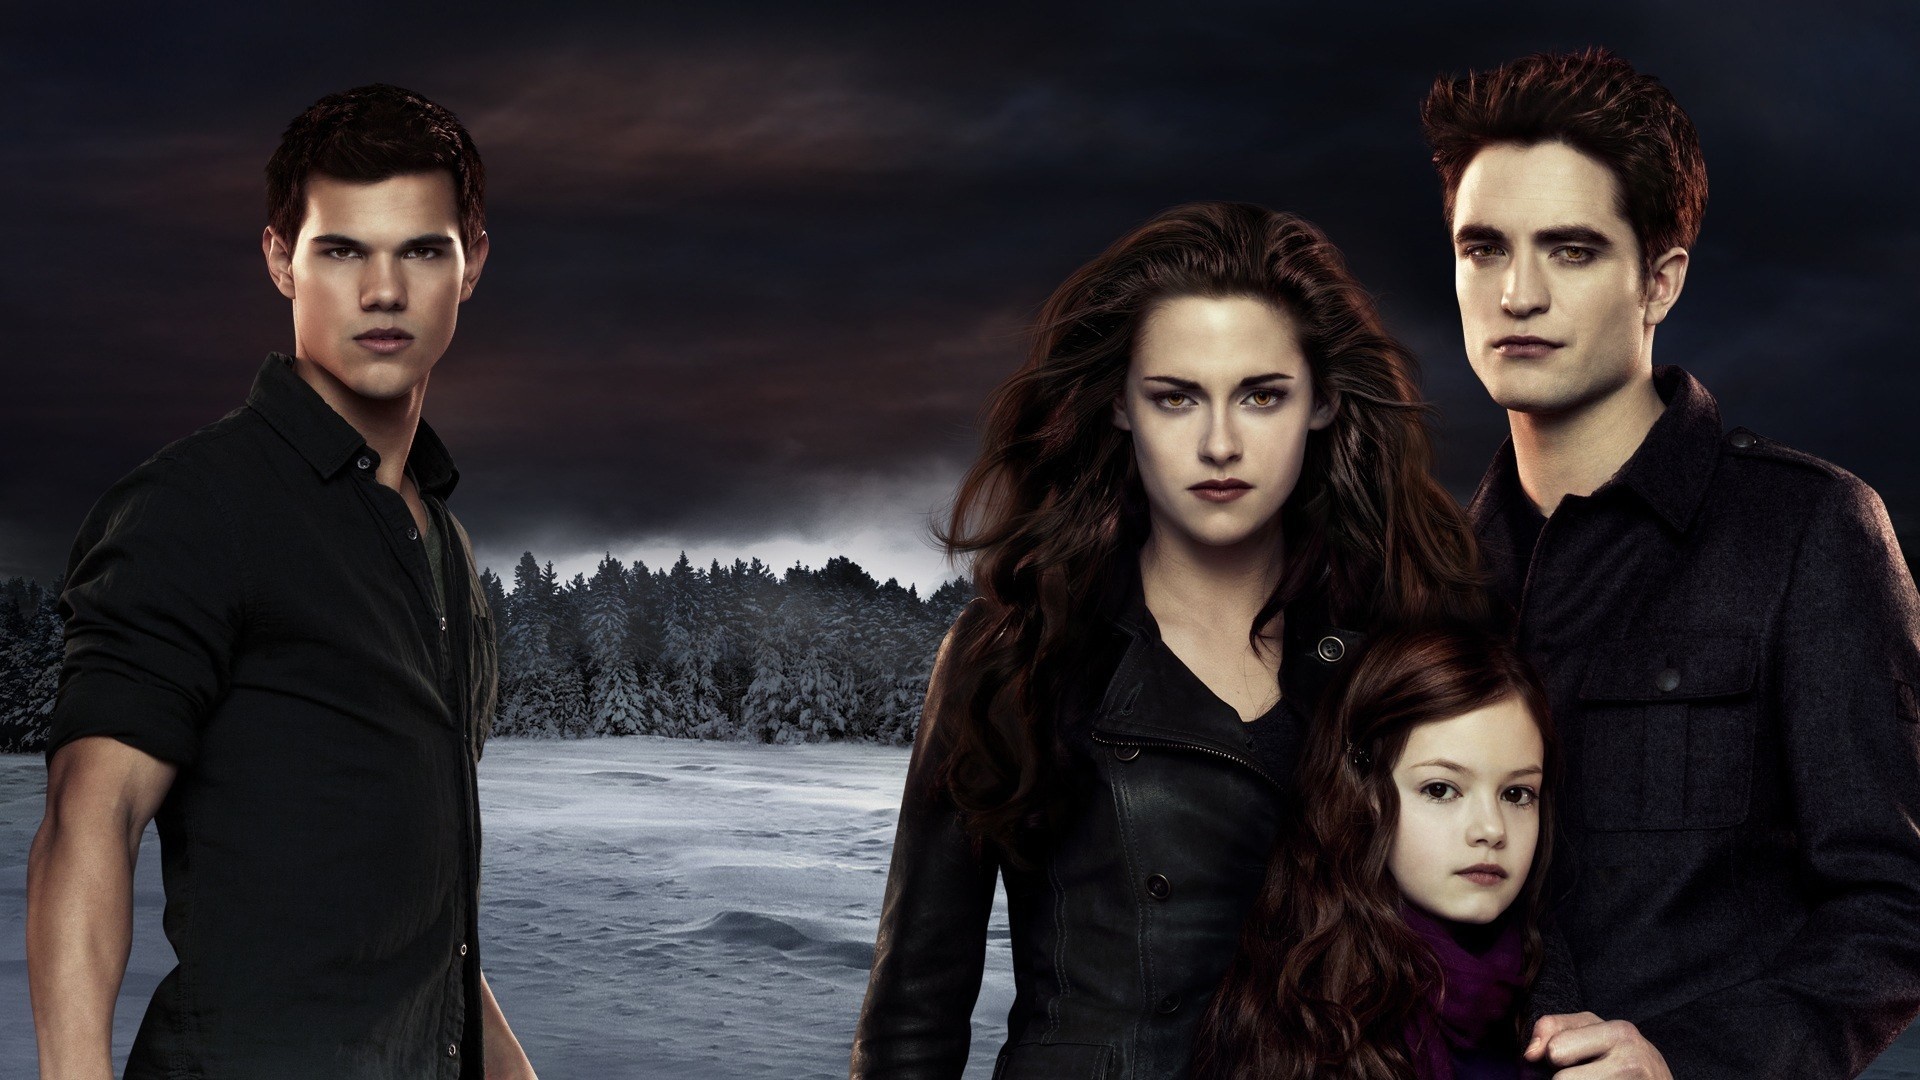 1920x1080 In the final installment of THE TWILIGHT SAGA, Bella has opened her eyes to  a whole new world. A vampire world. She is finally immortal, and can spend  ...